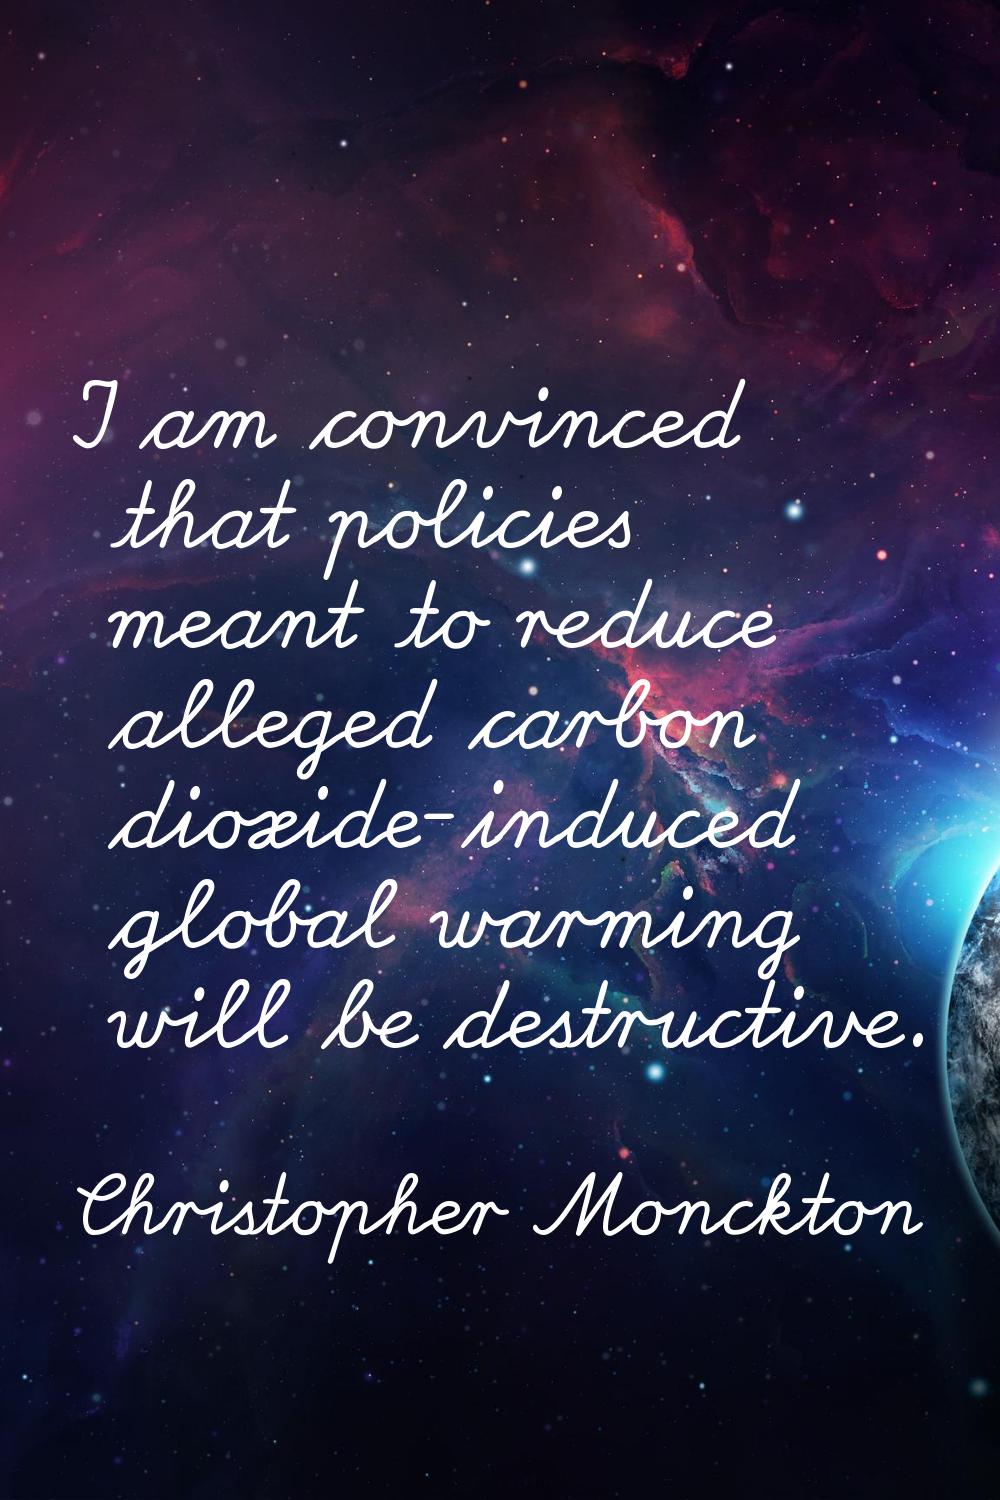 I am convinced that policies meant to reduce alleged carbon dioxide-induced global warming will be 